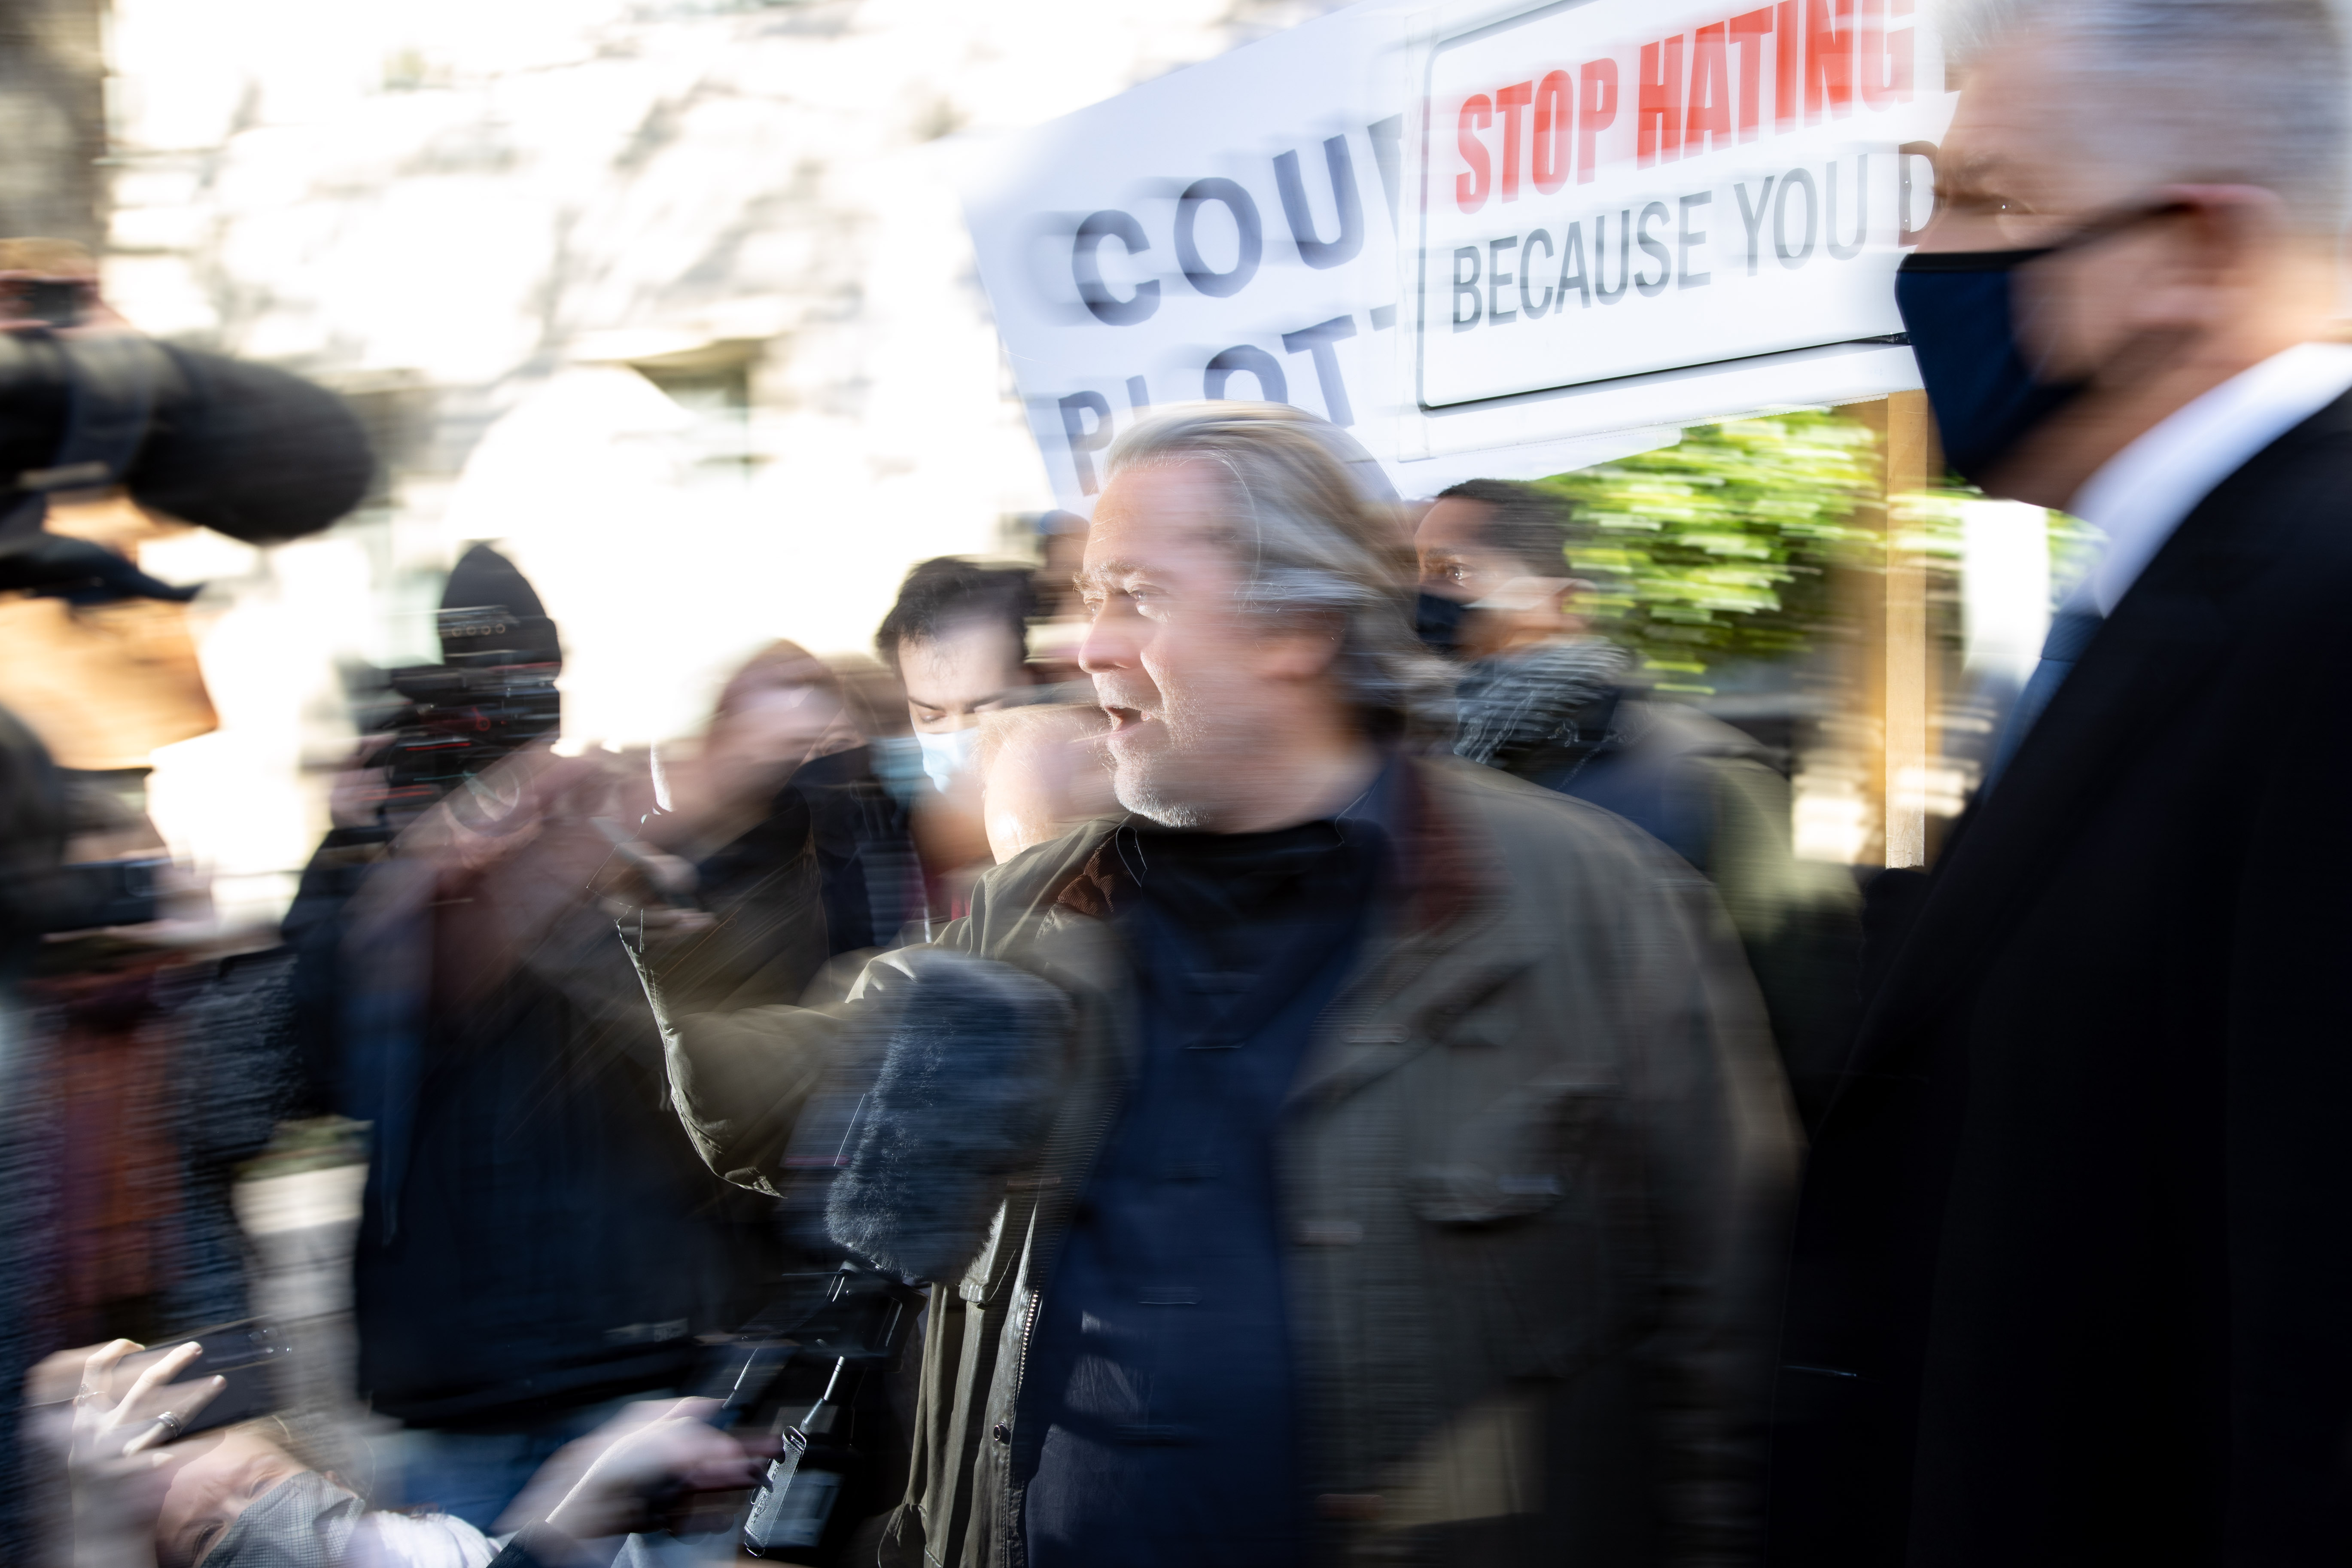 Former Trump strategist Steve Bannon speaks with press while leaving the E. Barrett Prettyman United States Federal Courthouse in Washington, D.C. on November 15, 2021 after turning himself in earlier in the day at a FBI Field Office on two charges of contempt for his failure to comply with the House committee investigation the January 6 U.S. Capitol riots (Photo by Bryan Olin Dozier/NurPhoto)NO USE FRANCE